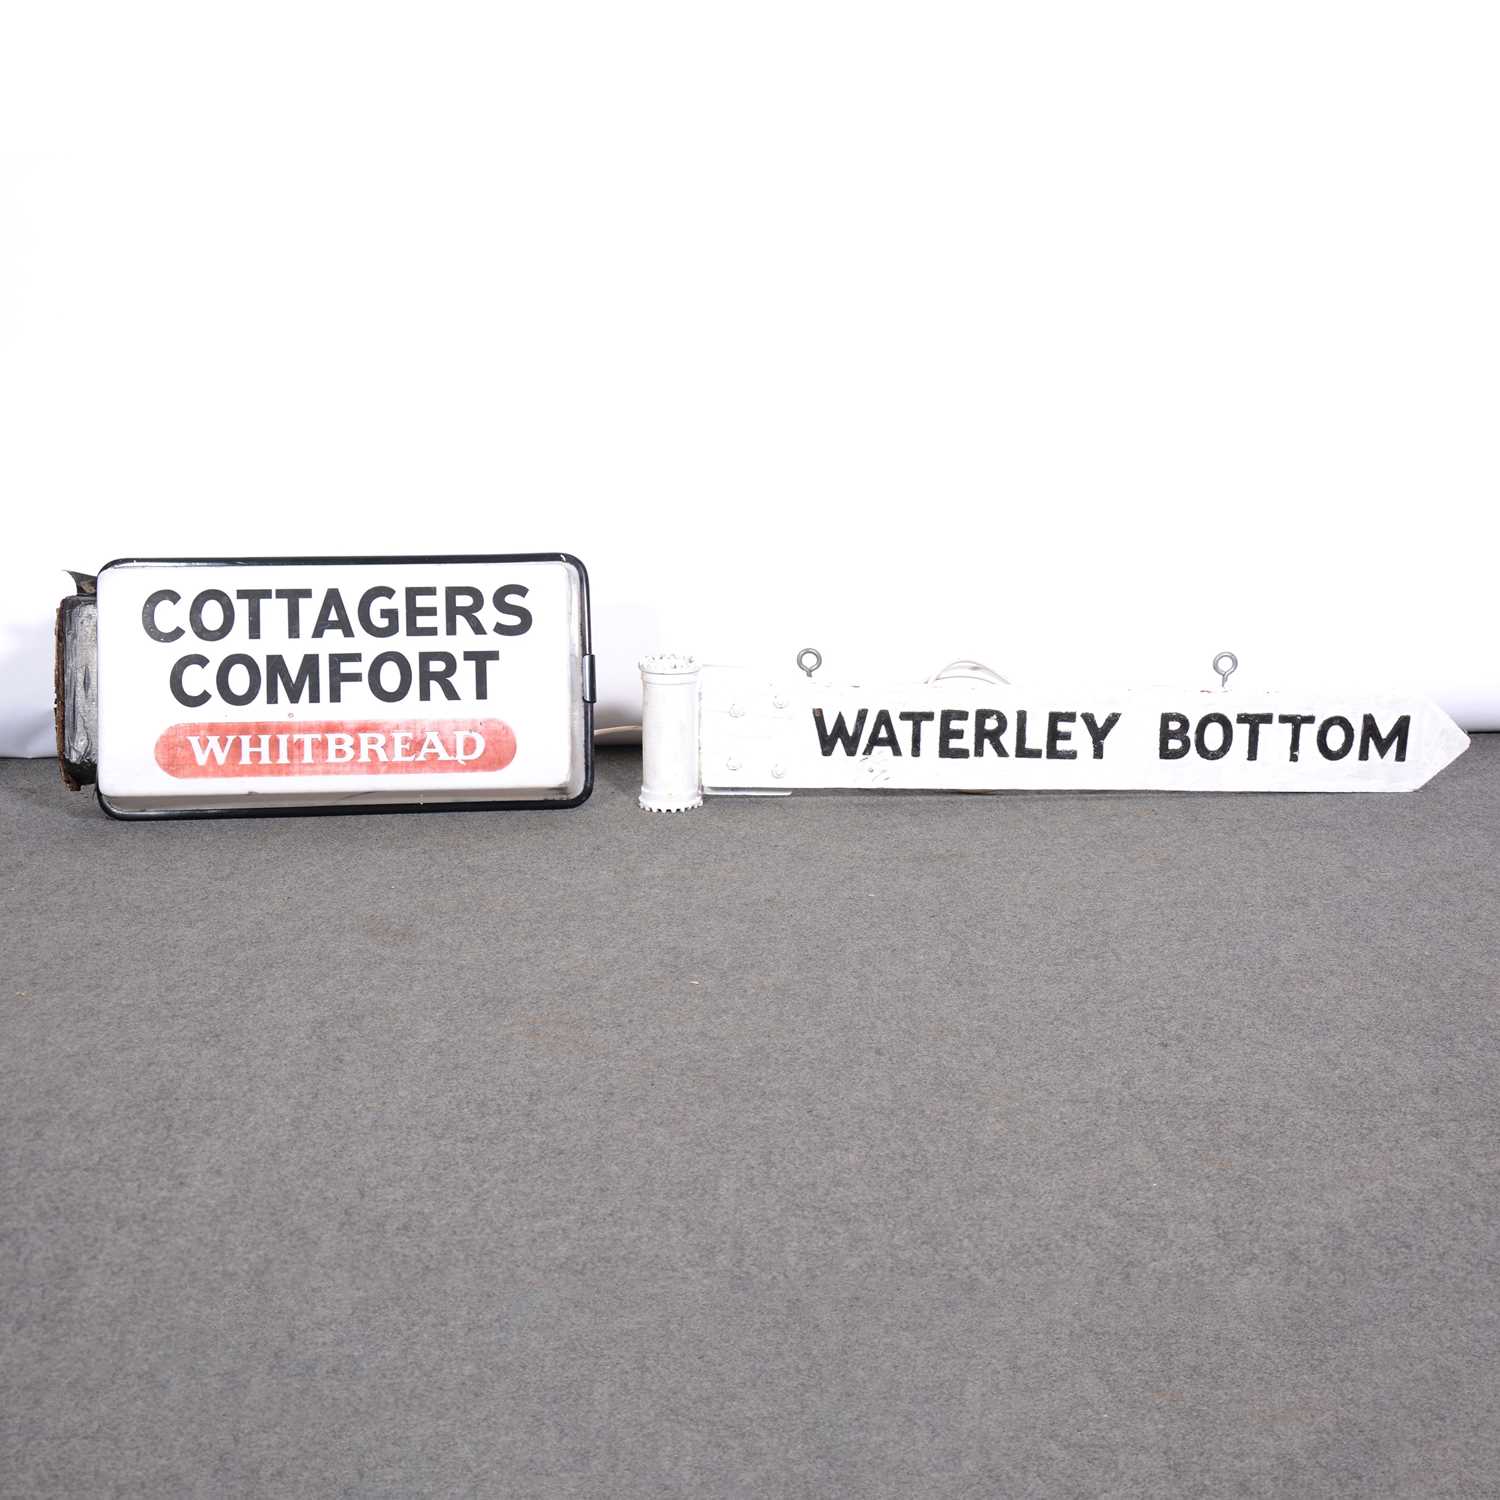 Lot 165 - "Waterley Bottom" road sign, a Whitbread sign, and another sign